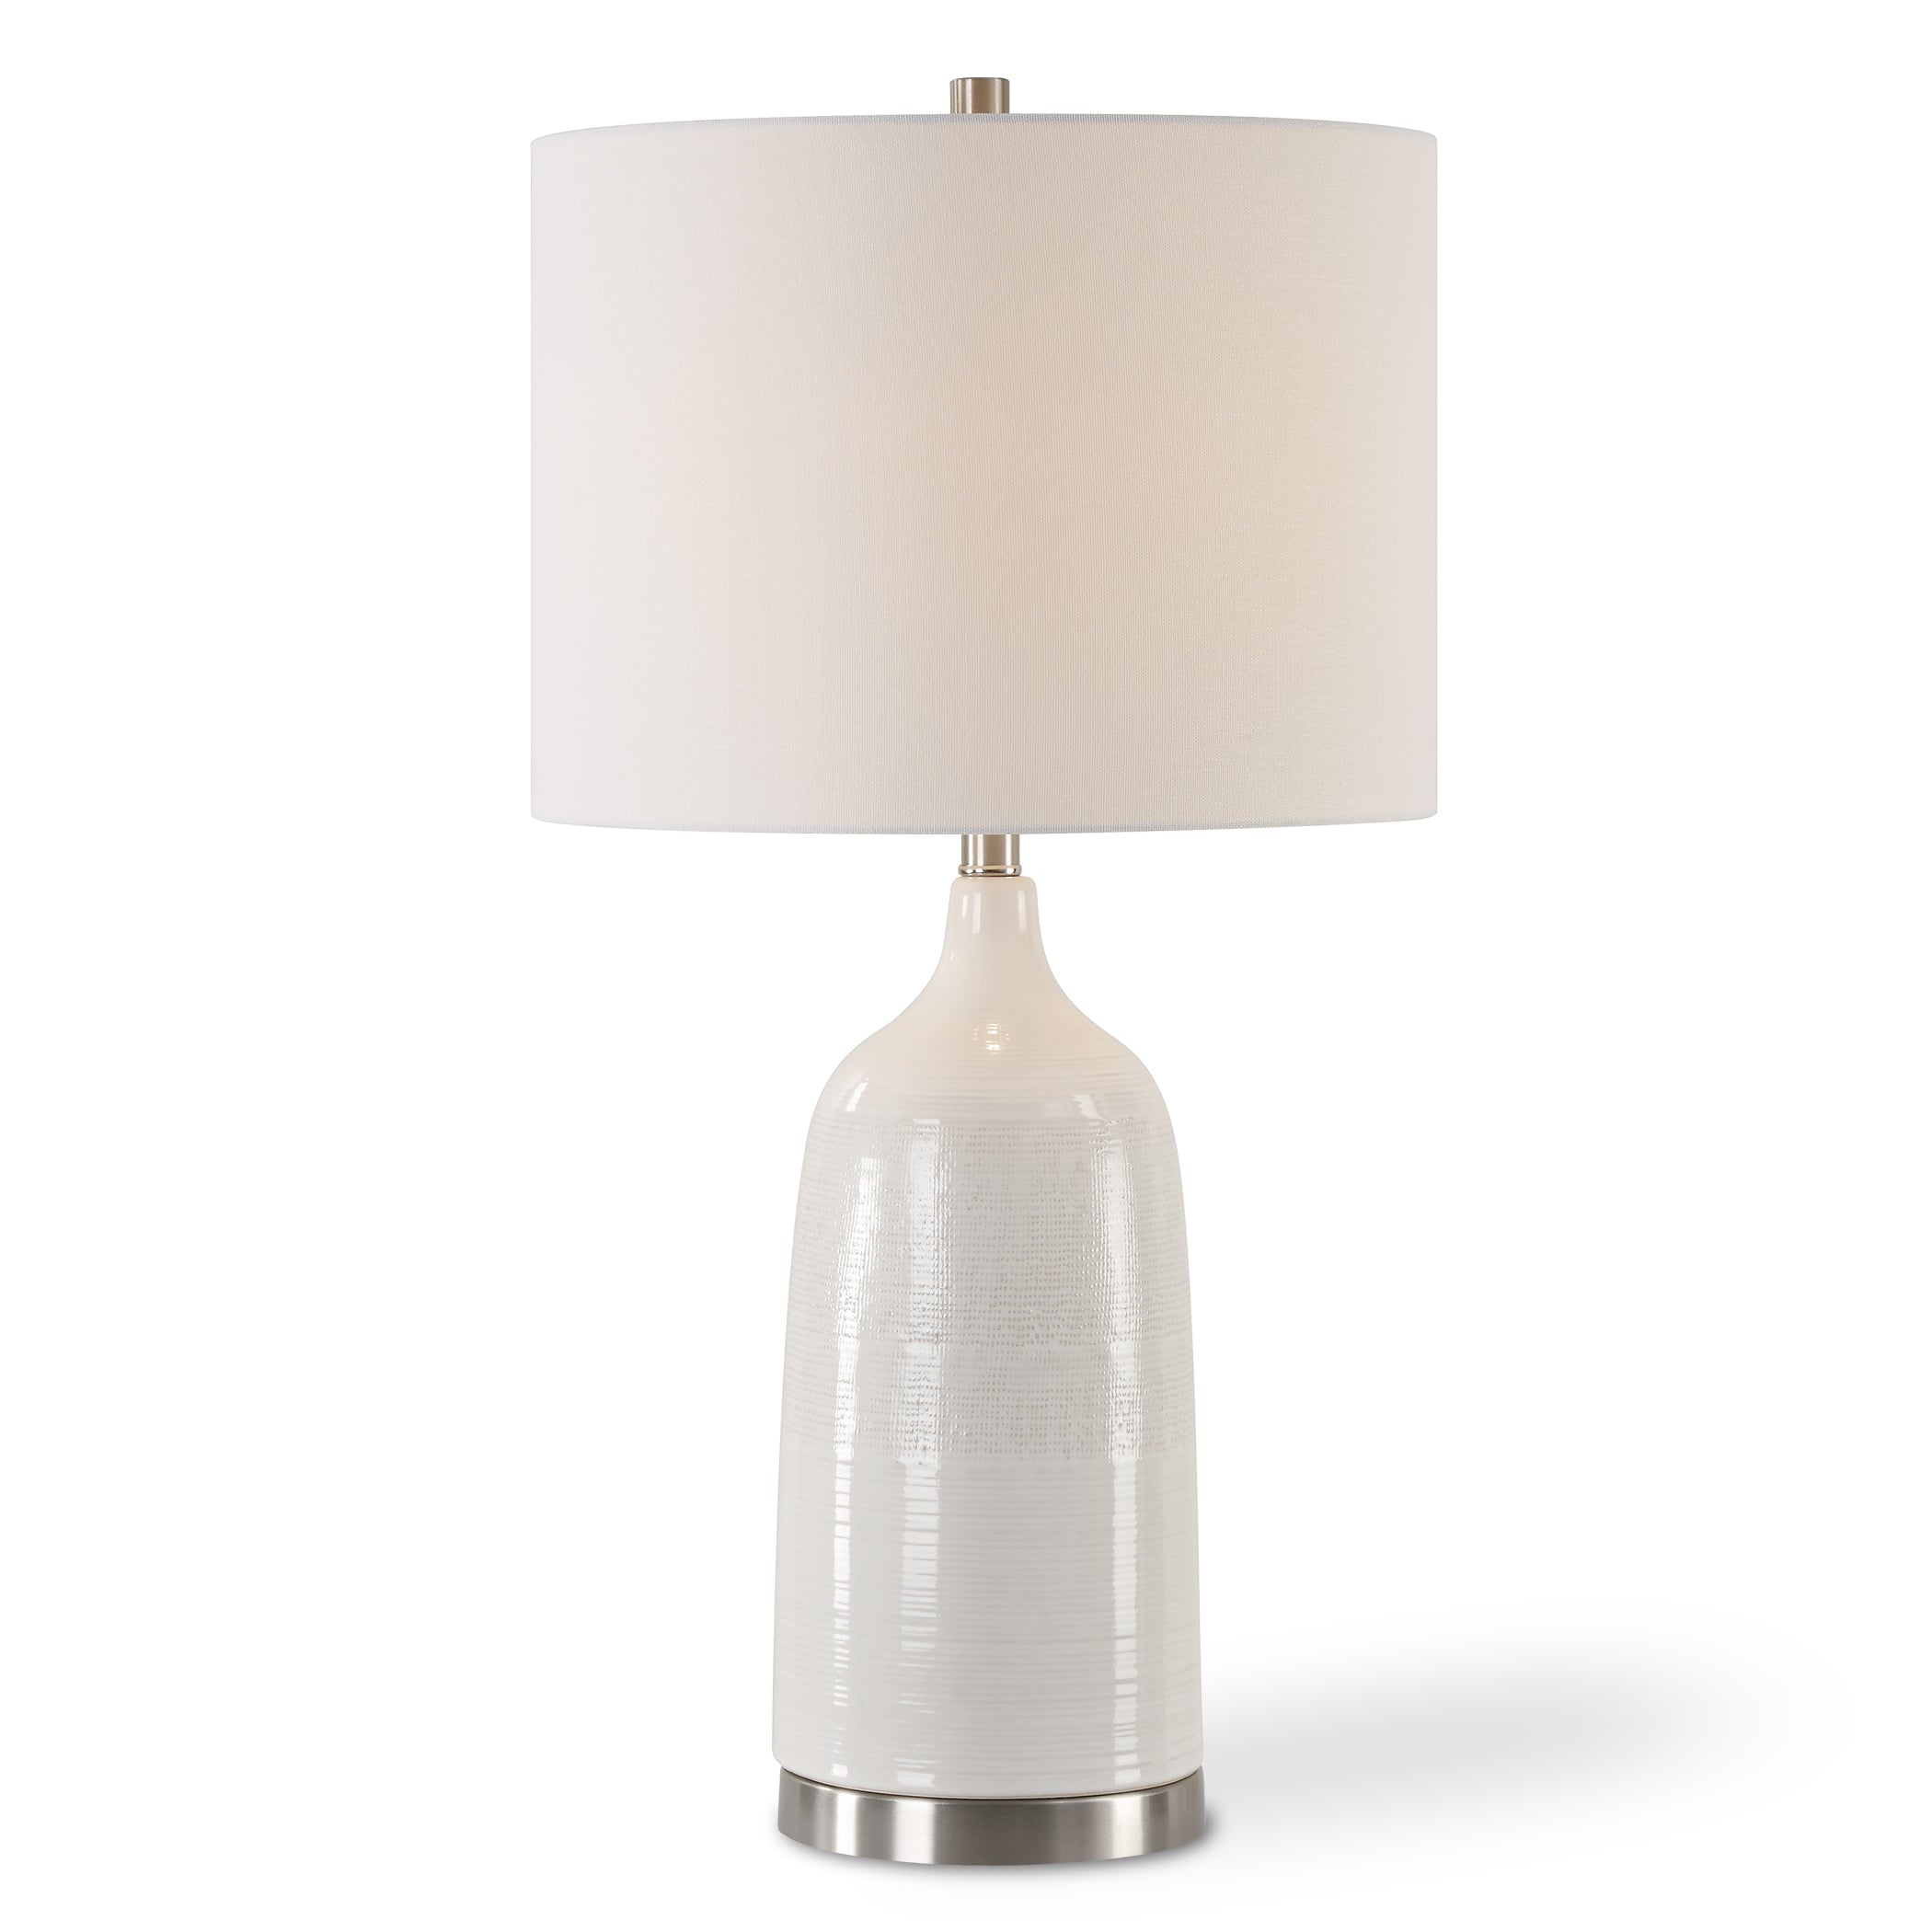 TABLE LAMP WL-19 Uttermost